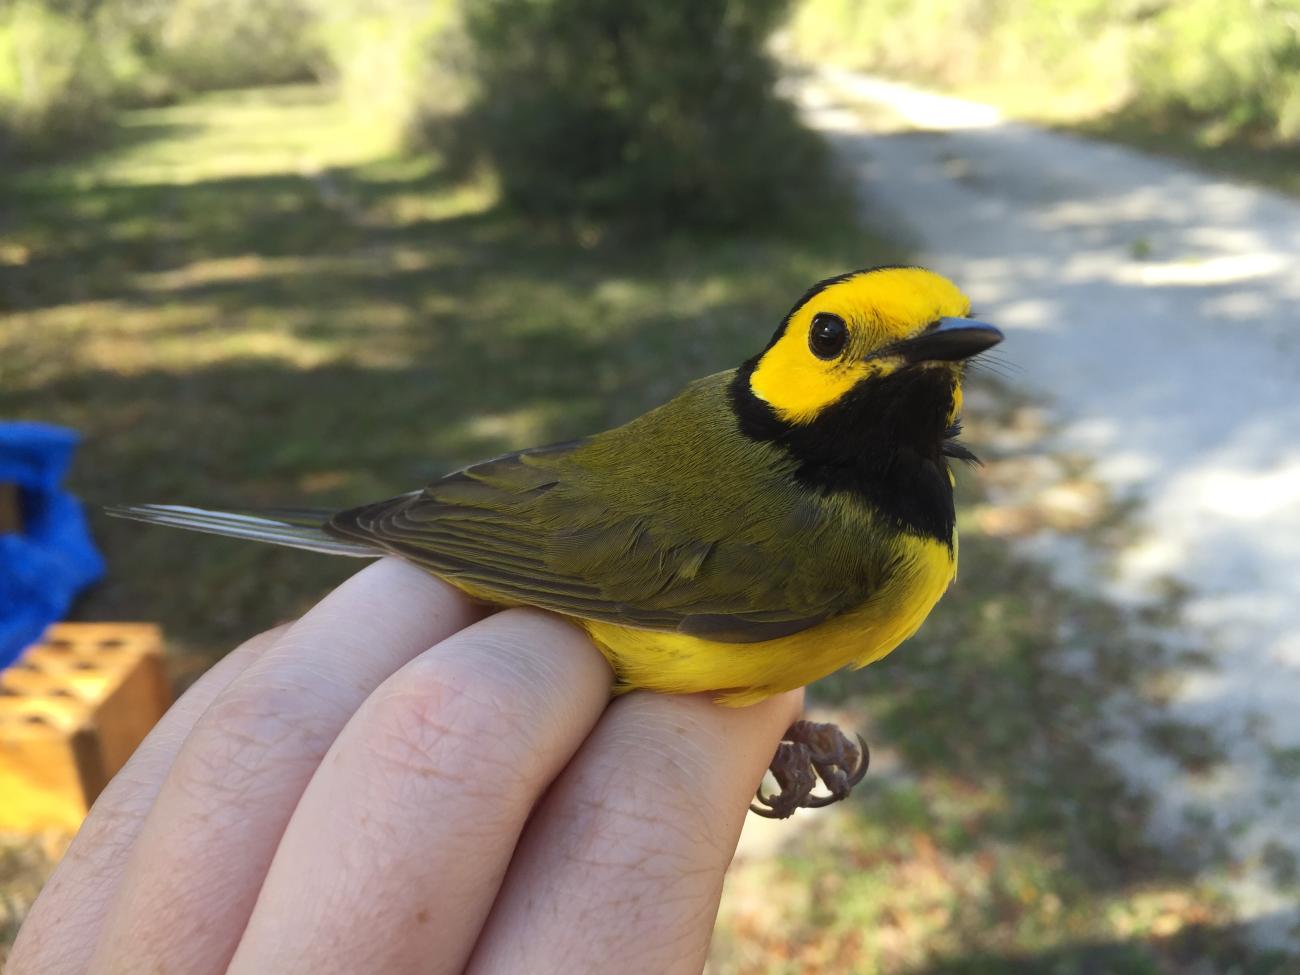 A yellow and black bird on someone's hand